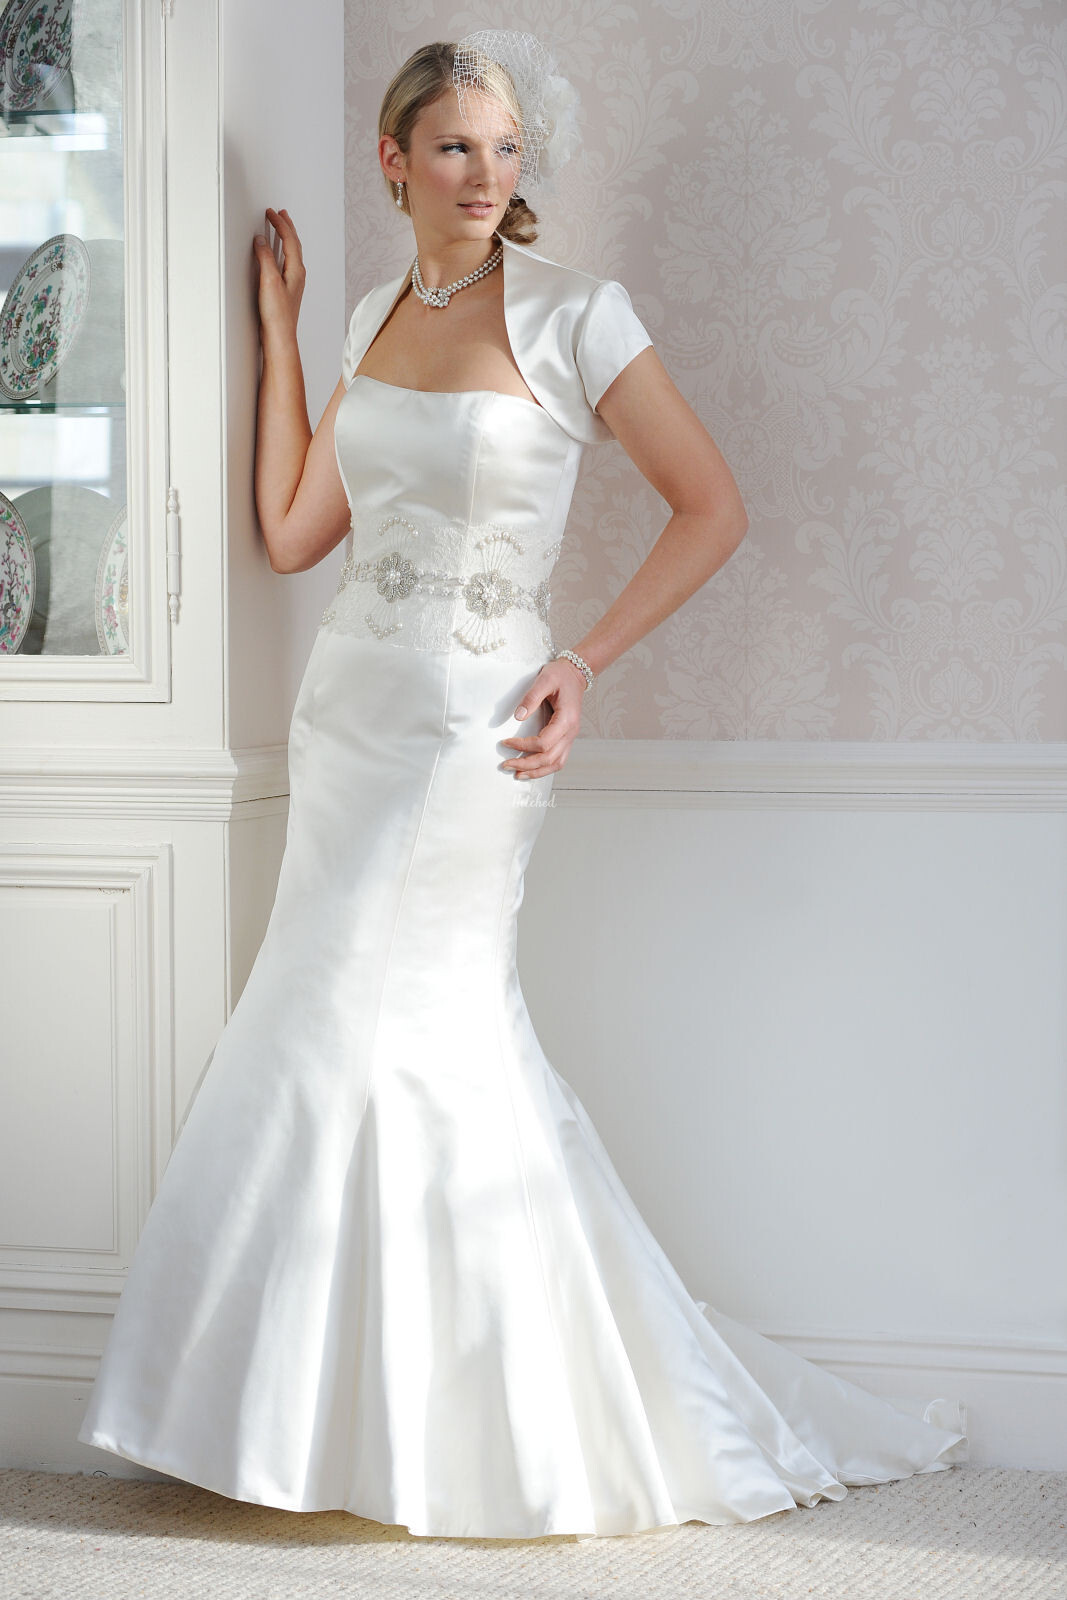 Iris Wedding Dress from Forget Me Not Designs - hitched.ie